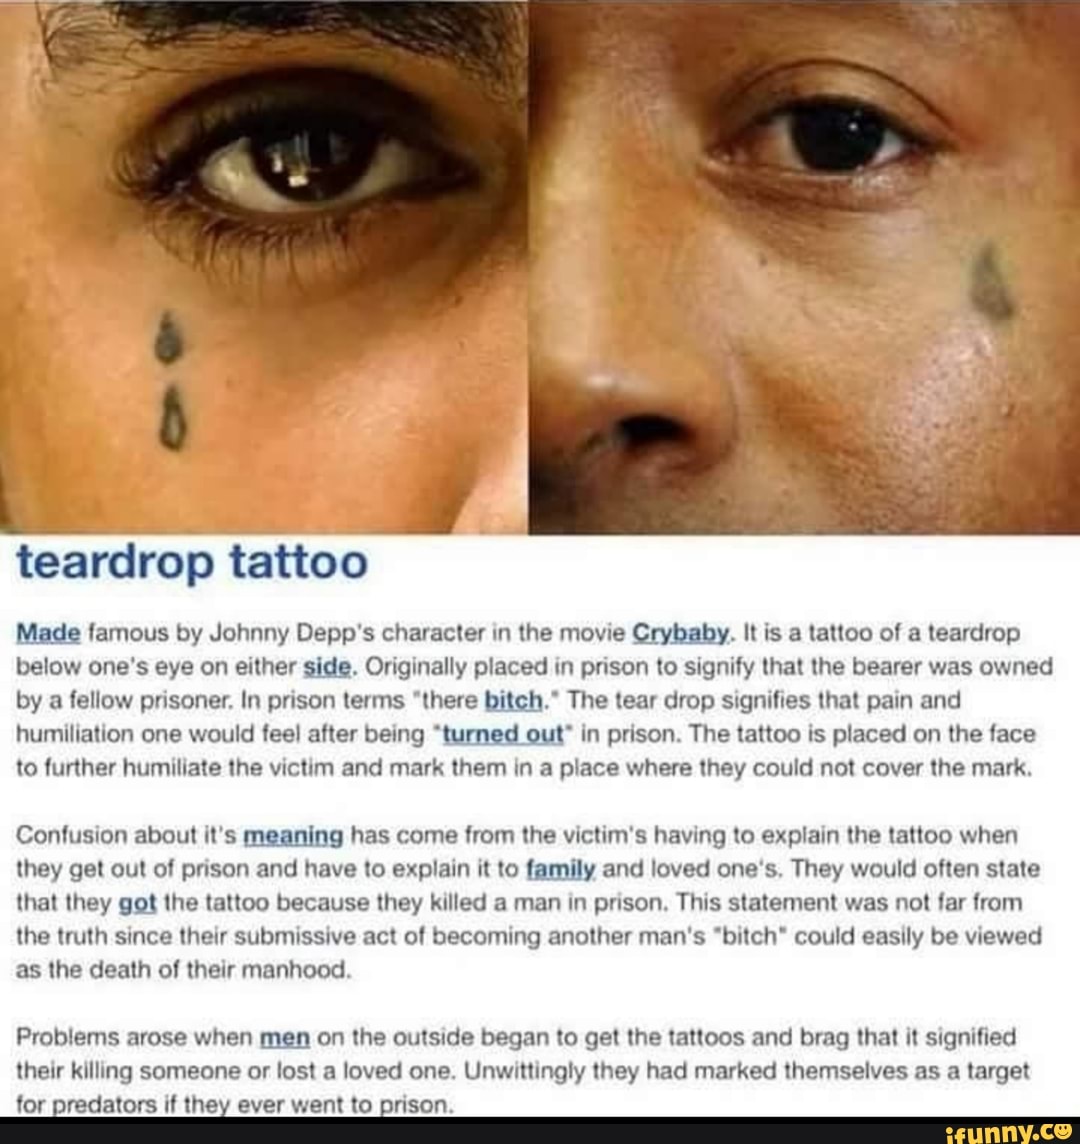 Teardrop tattoo Made famous by Johnny Depp's character in the movie Crybaby. It is a tattoo